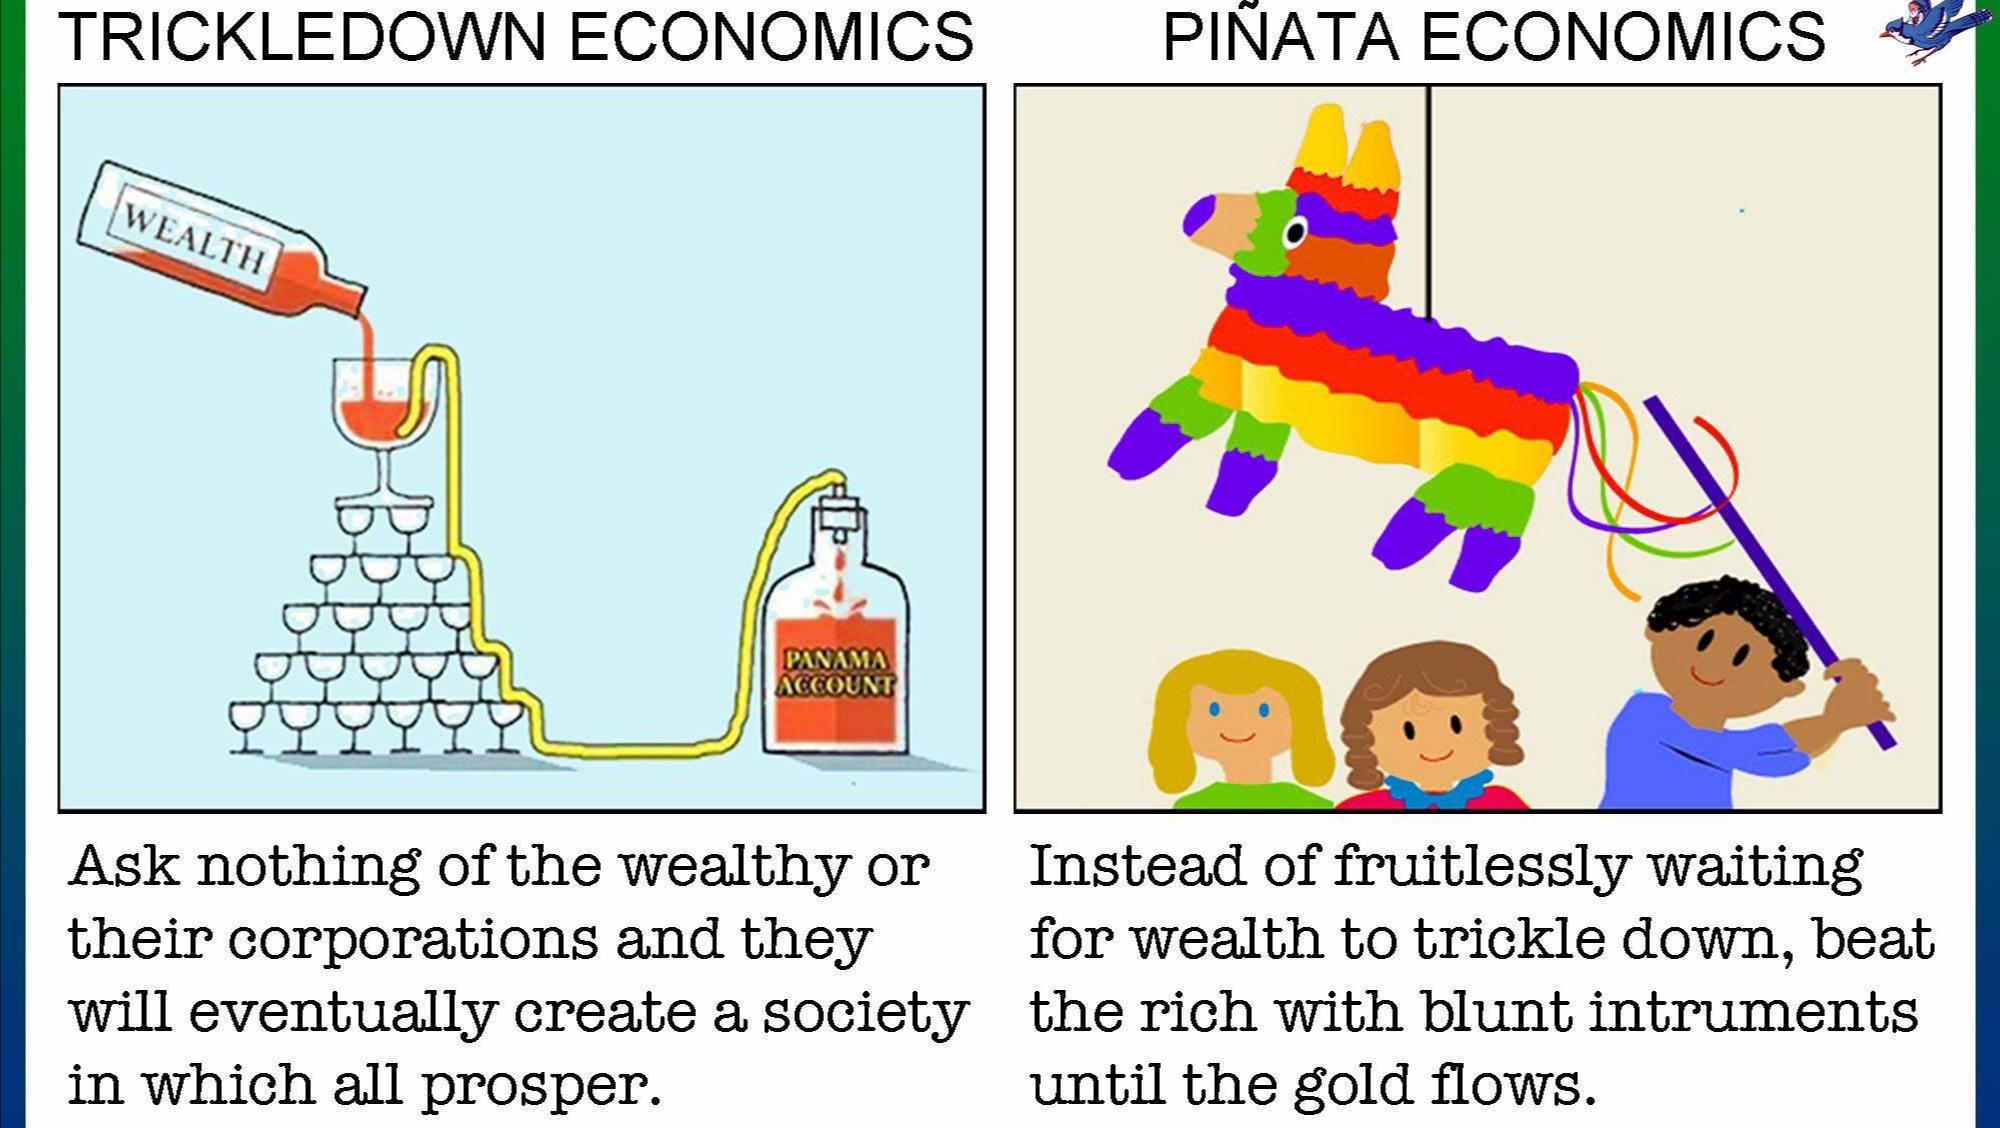 Trickle-down economics - Trickledown Economics Piata Economics Wealth Panama Account Ask nothing of the wealthy or Instead of fruitlessly waiting their corporations and they for wealth to trickle down, beat will eventually create a society the rich with b